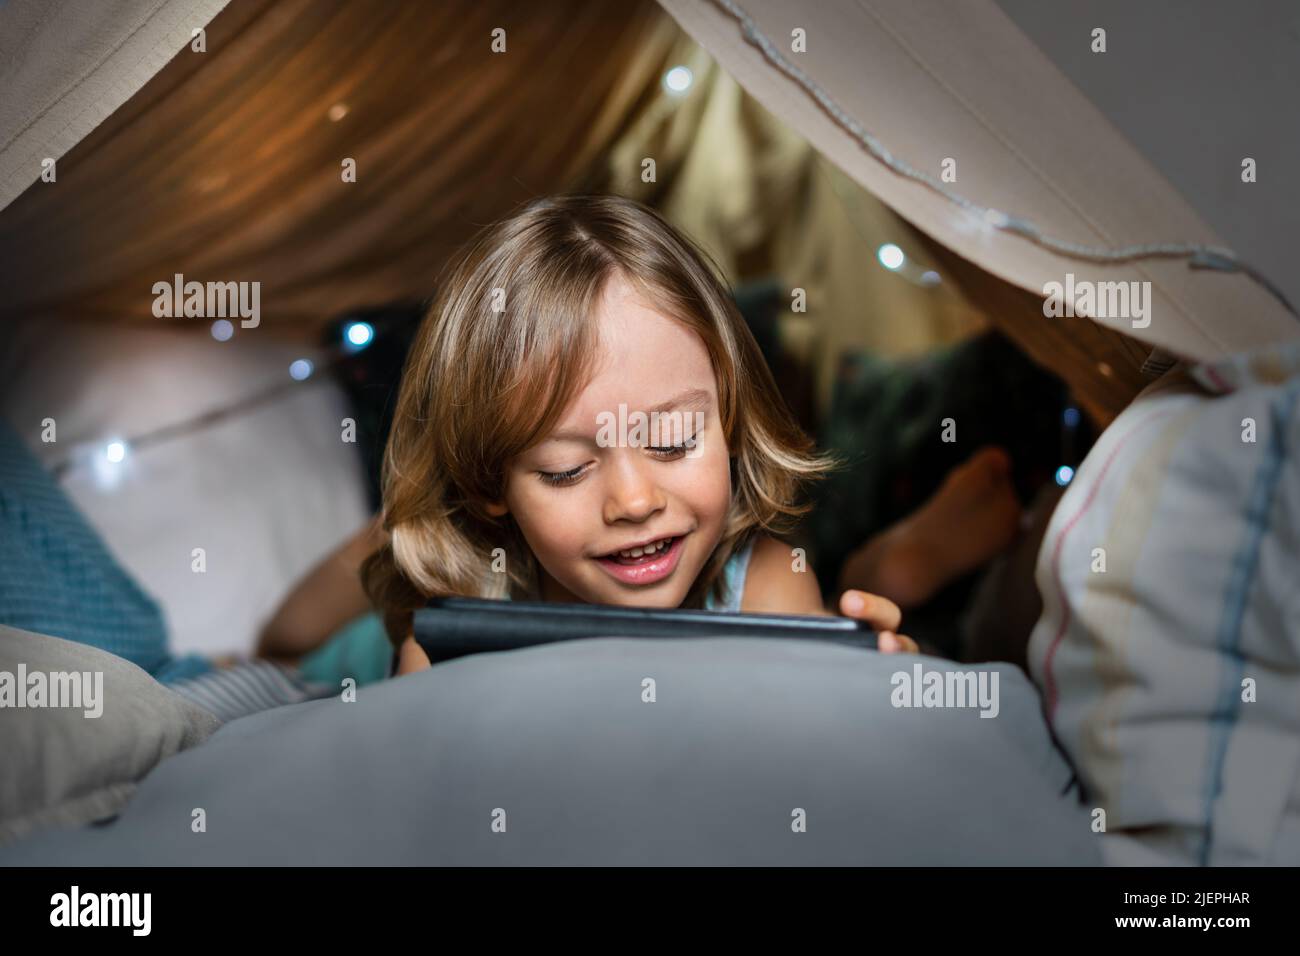 Happy cute little 6 year old boy having fun playing in teepee tent. Child using digital tablet watching cartoons or playing computer games lying in kid tent at home.  Stock Photo